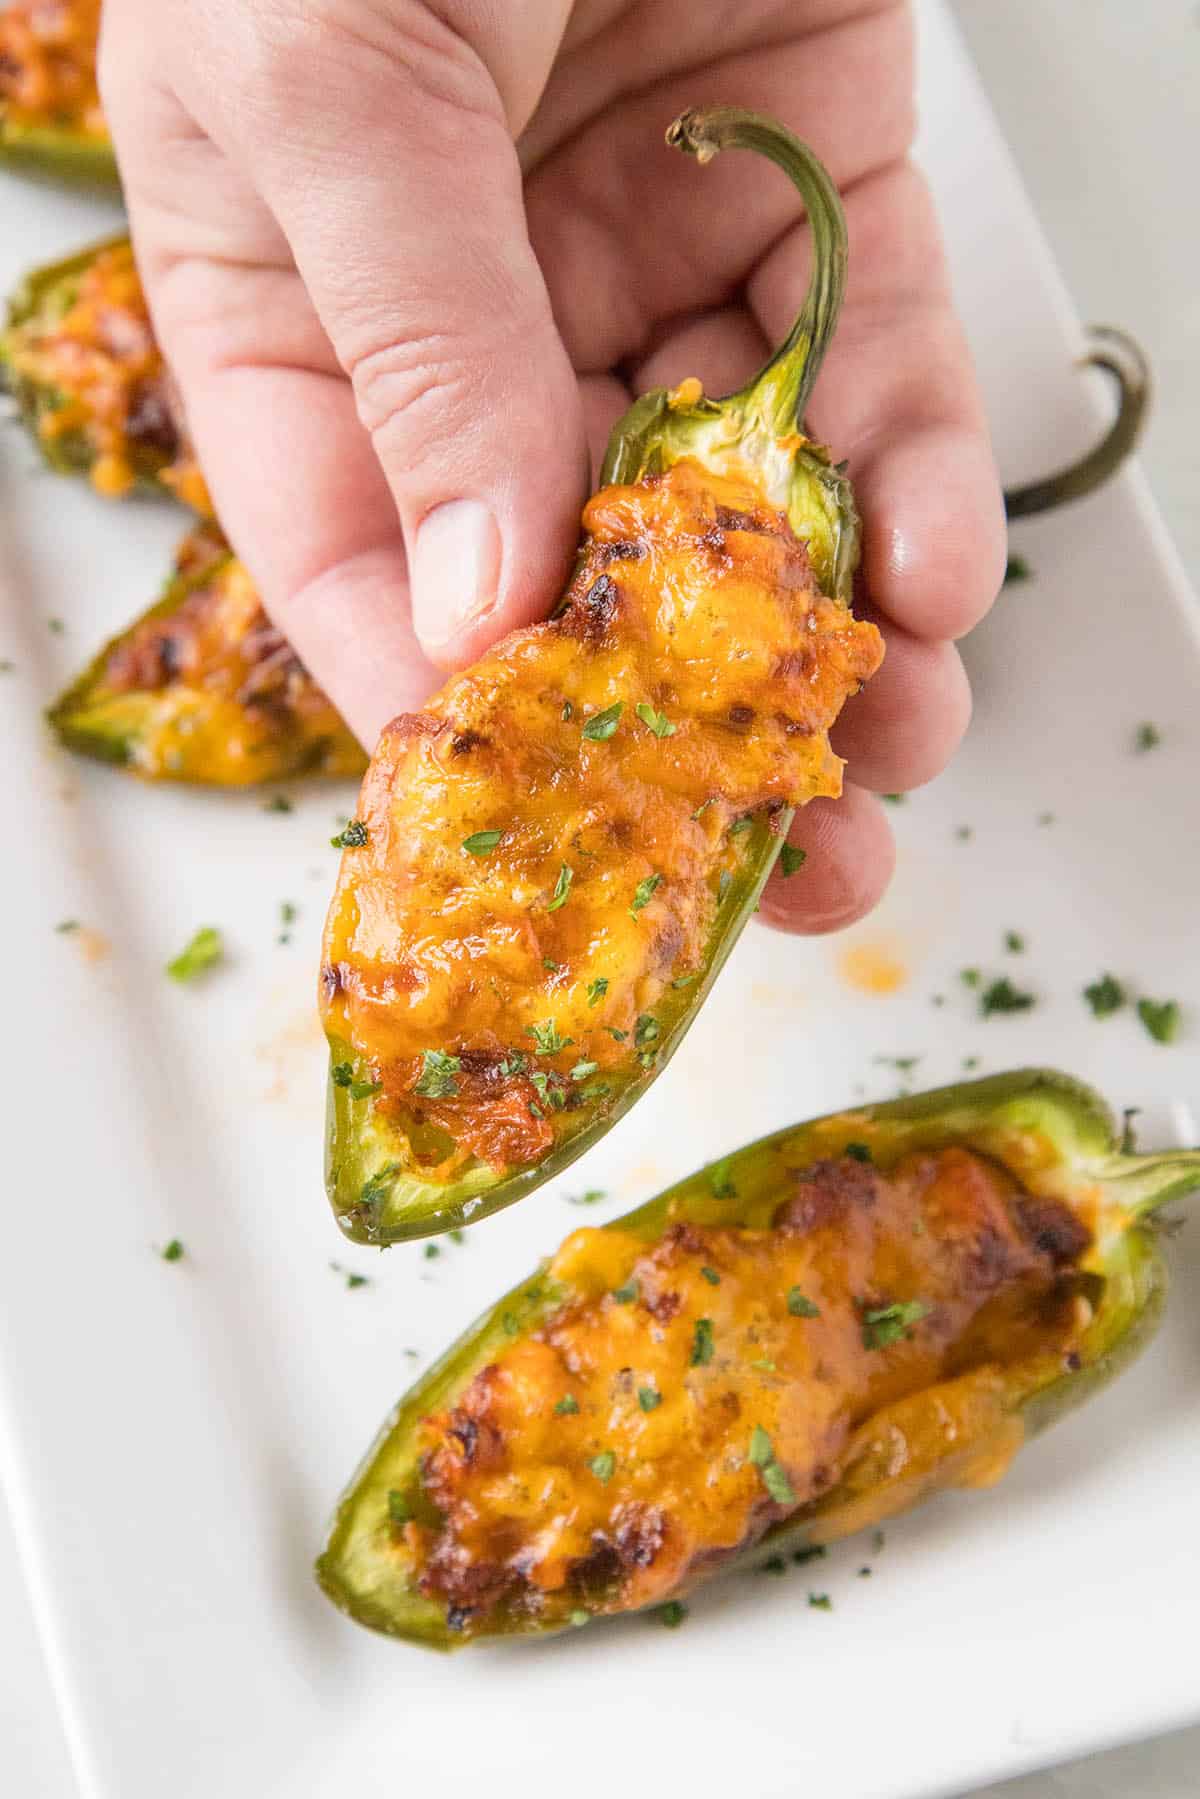 Pulled Pork-Sriracha Jalapeno Poppers - In my hand. I'm ready to eat it!